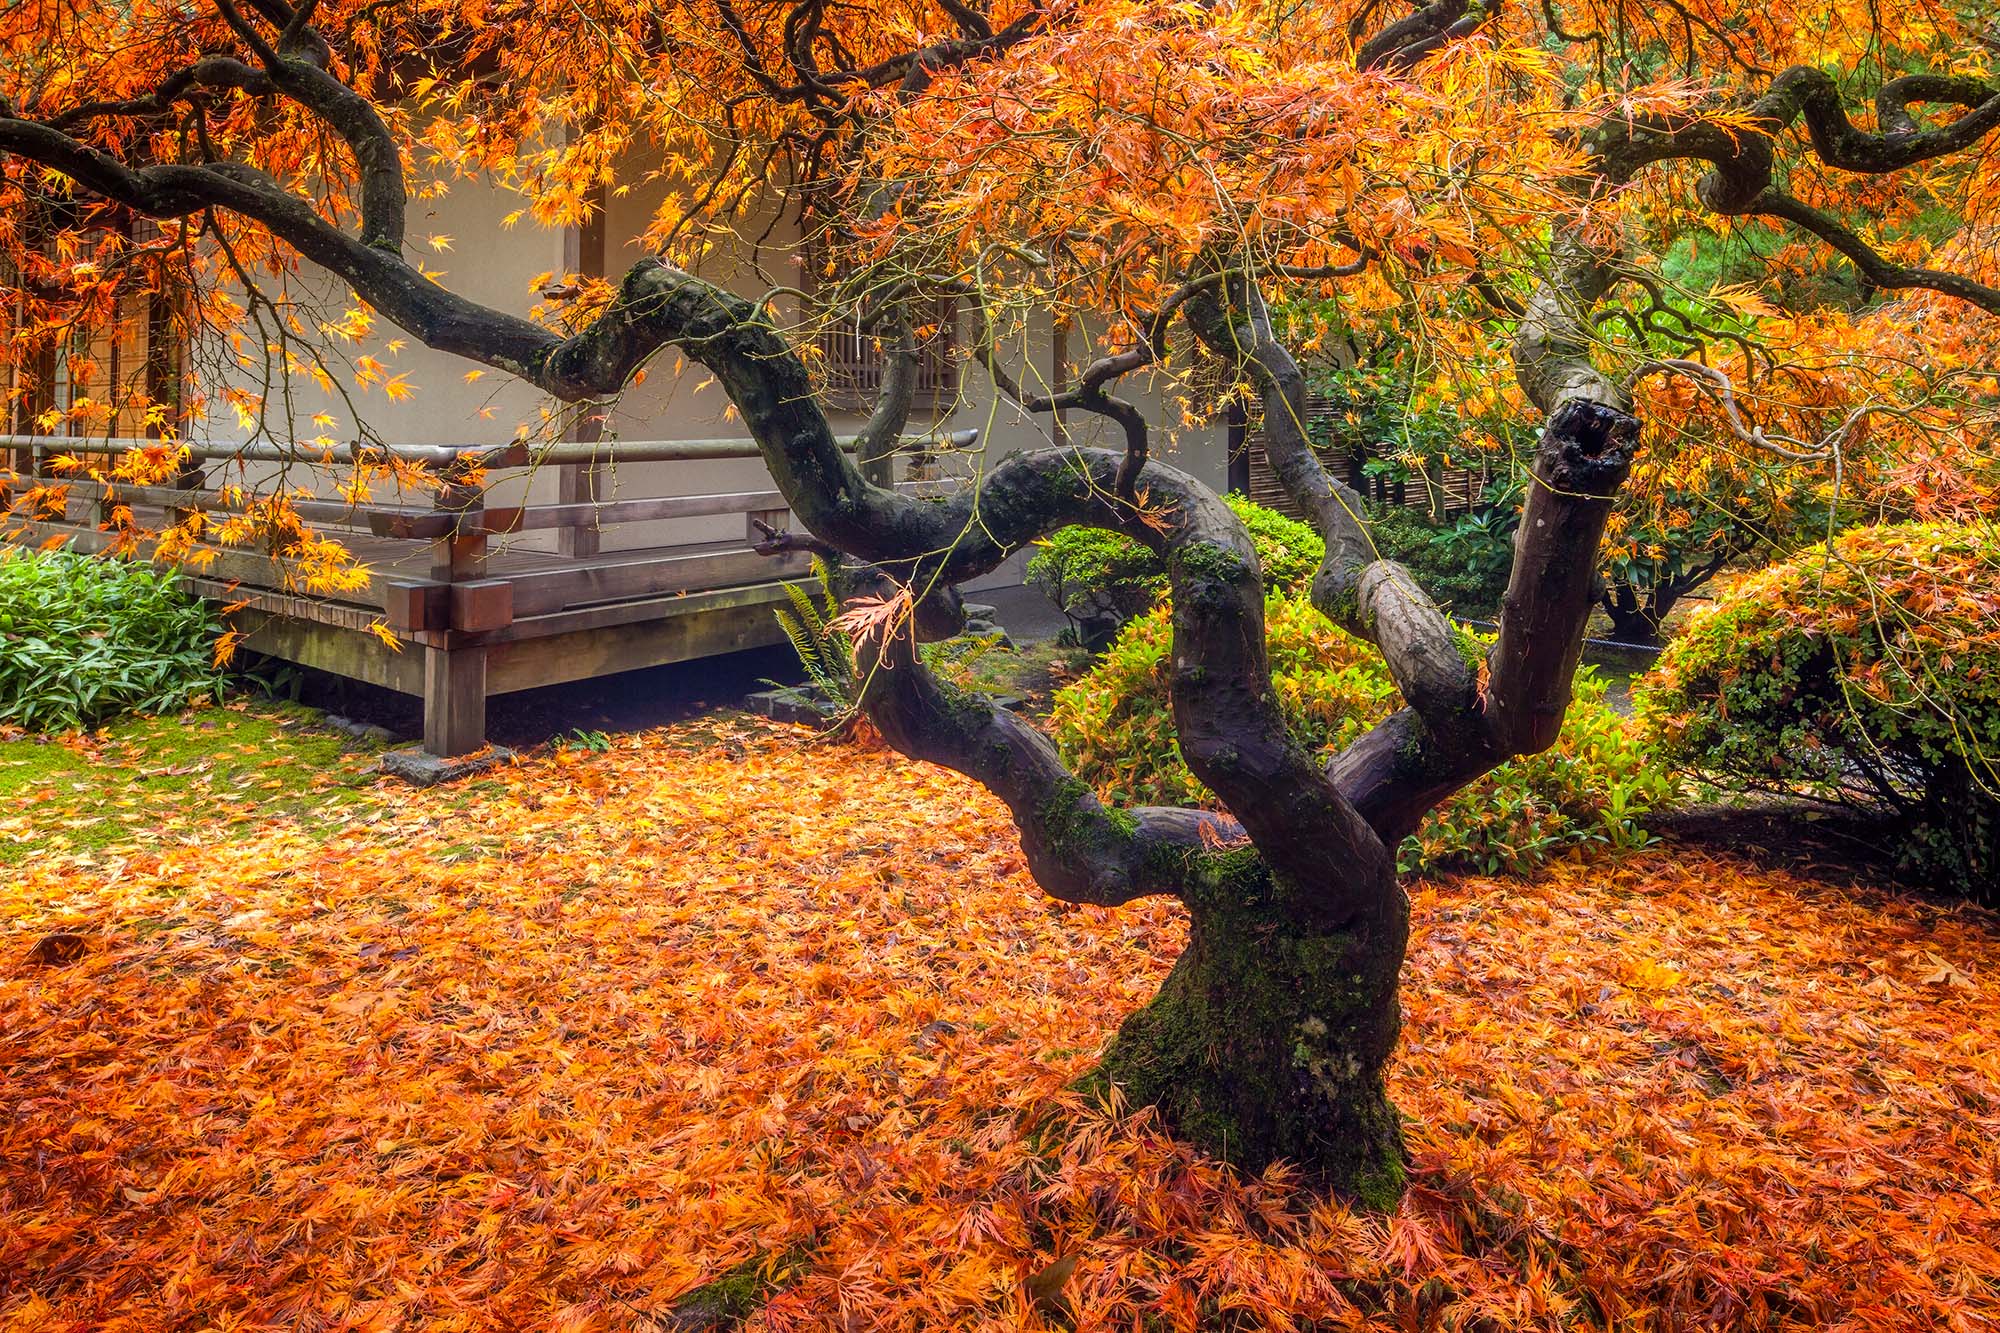 This image, set in the tranquil surroundings of the Portland Japanese Gardens in Oregon, highlights the beauty of a Japanese...